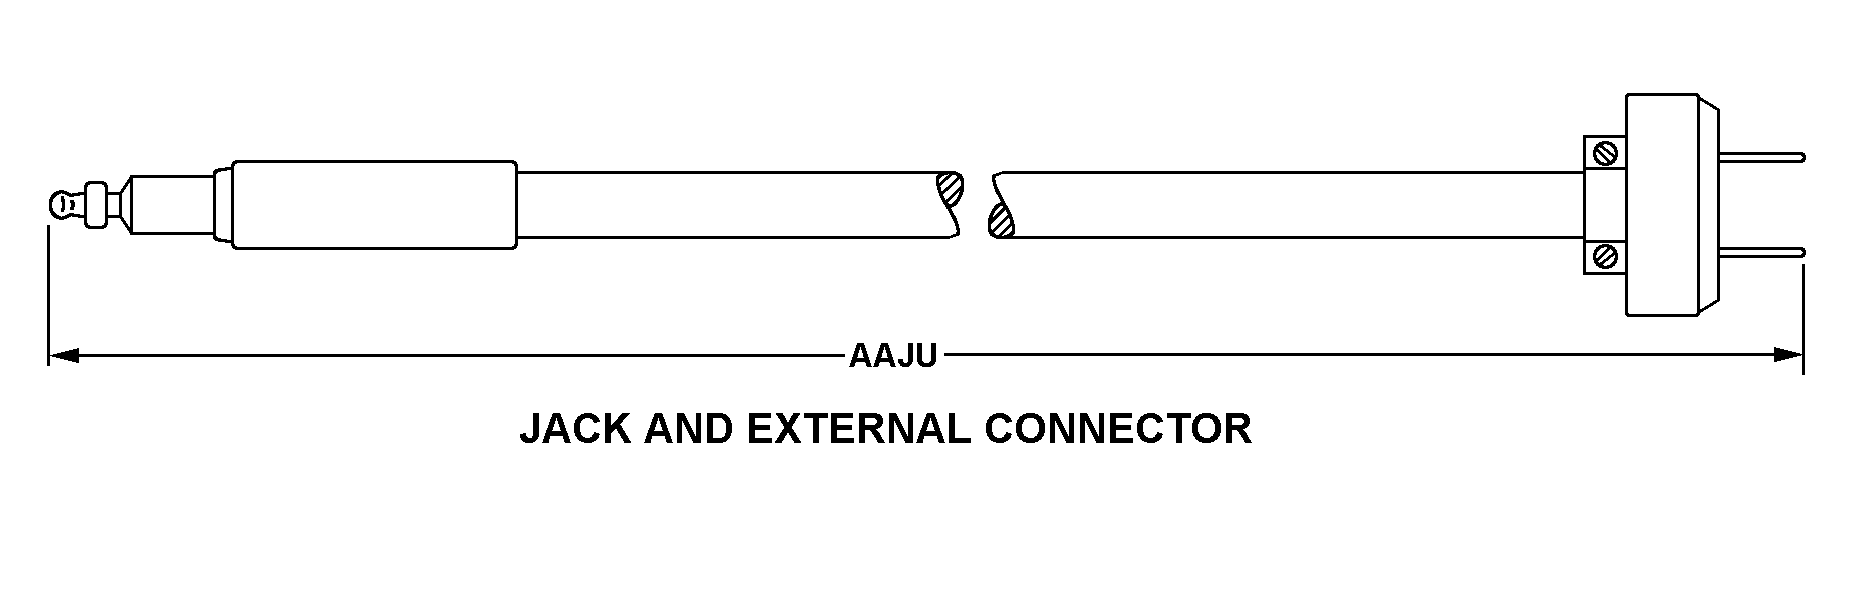 JACK AND EXTERNAL CONNECTOR style nsn 6150-01-067-6436